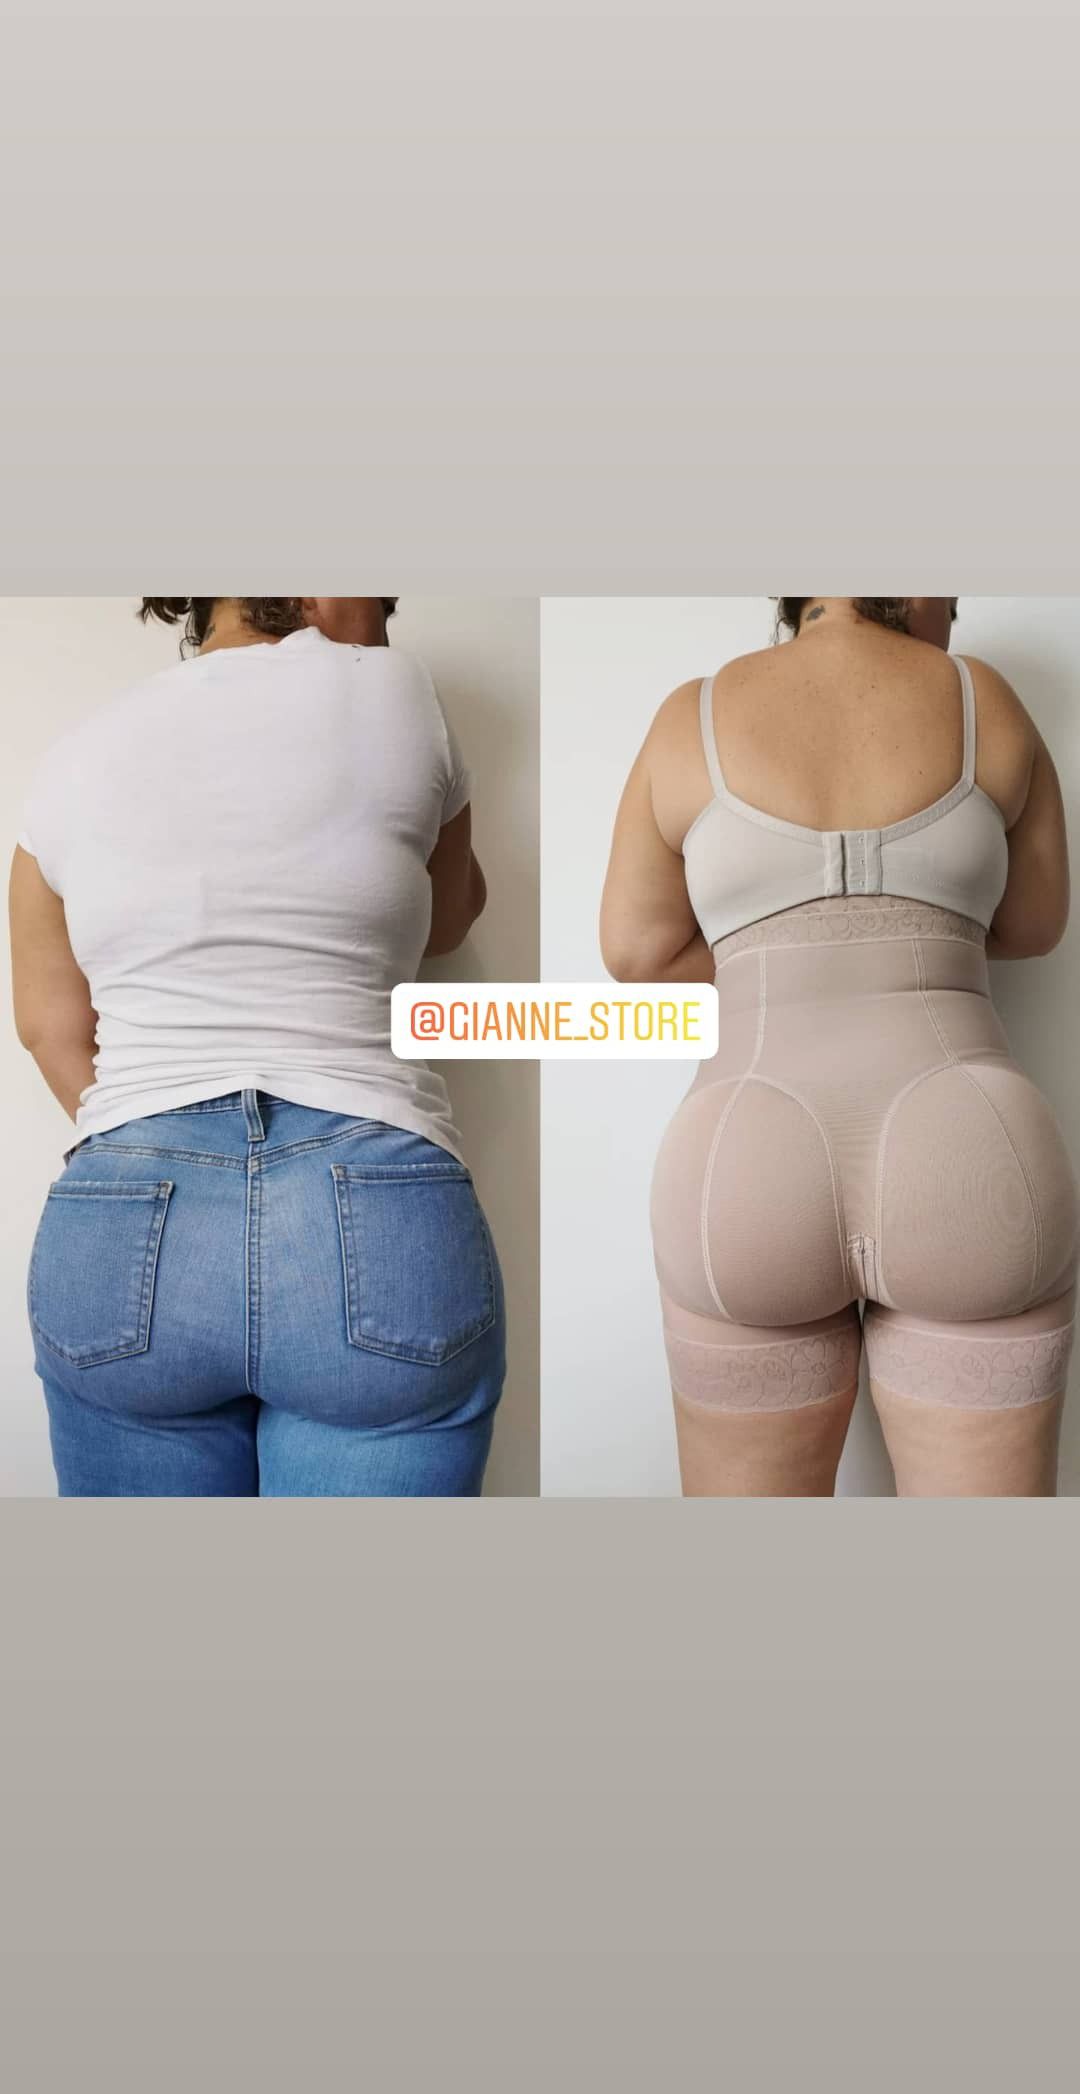 Girdles 100% colombian / Fajas 100% colombianas $85 and up